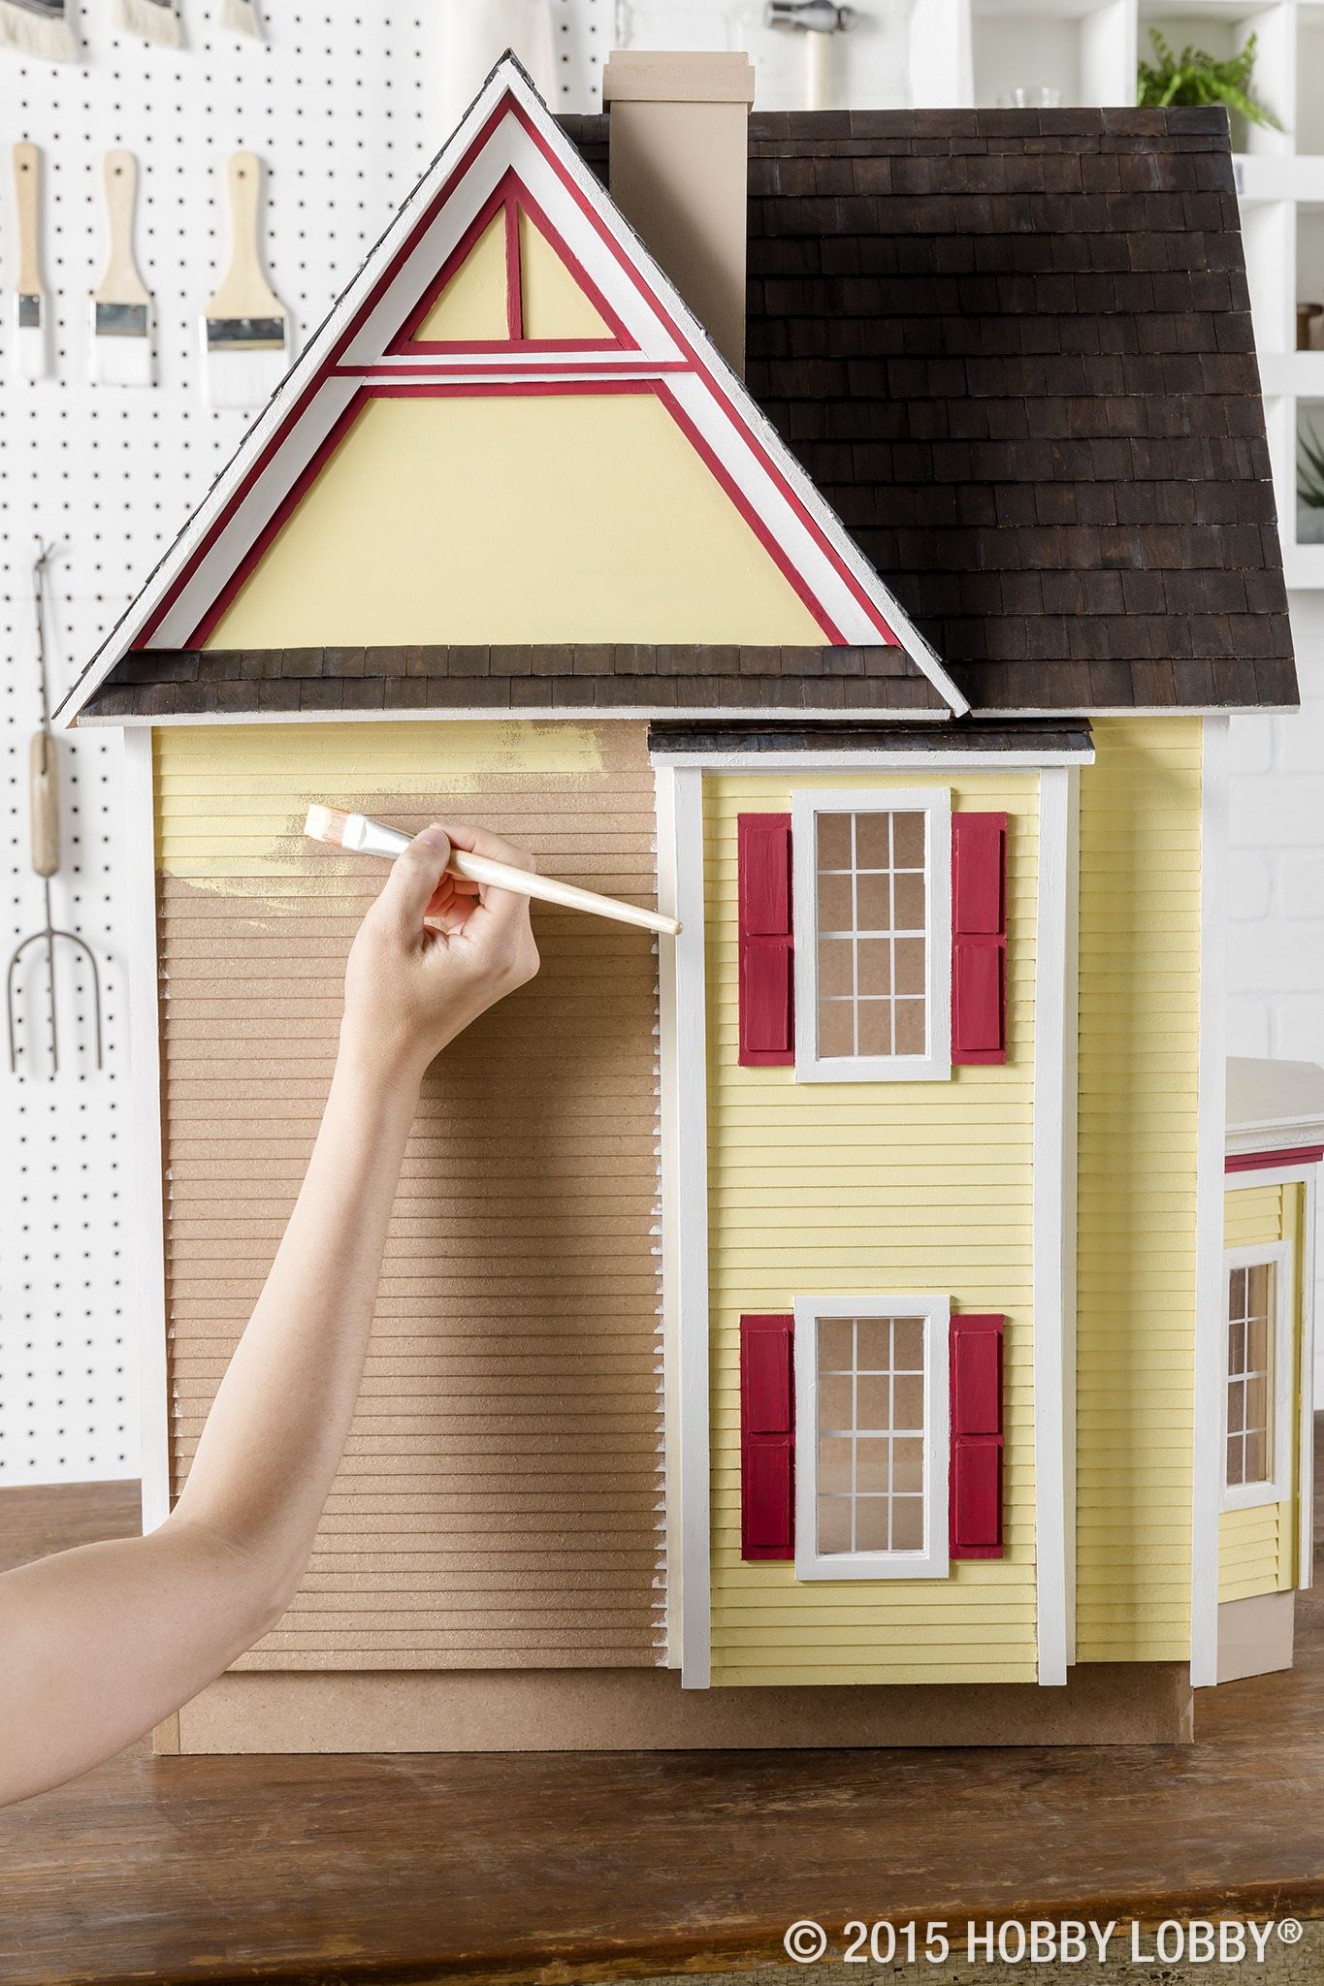 Tips For Painting A Dollhouse: 6) Start Painting At The Top, And ..